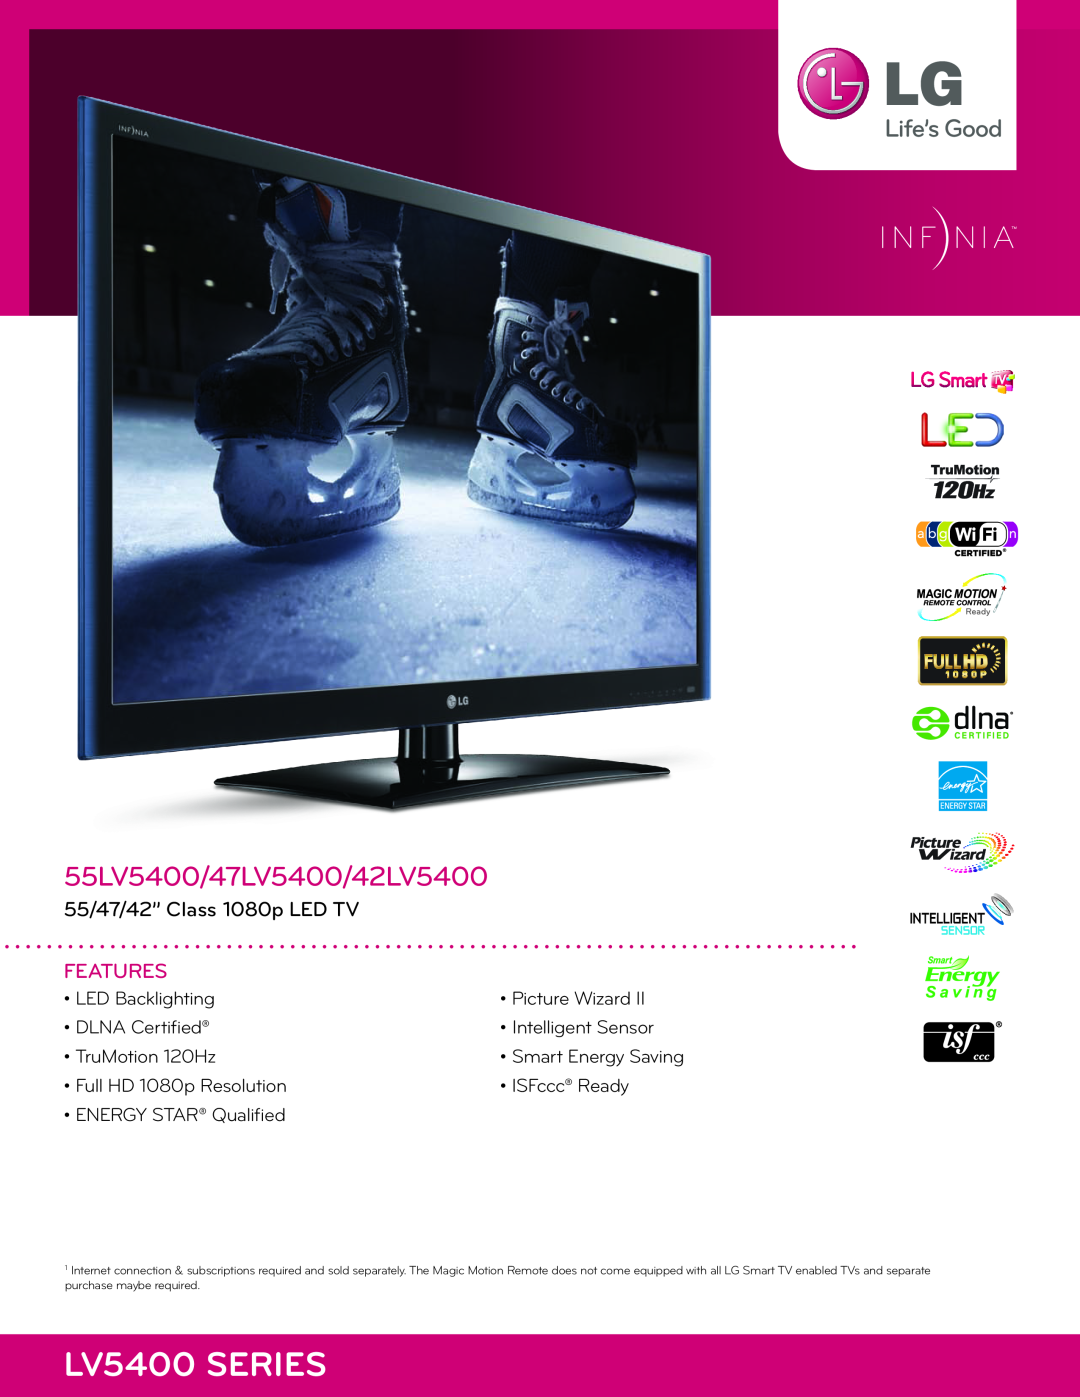 LG Electronics manual LV5400 SERIES, 55LV5400/47LV5400/42LV5400, 55/47/42” Class 1080p LED TV, Features, Picture Wizard 